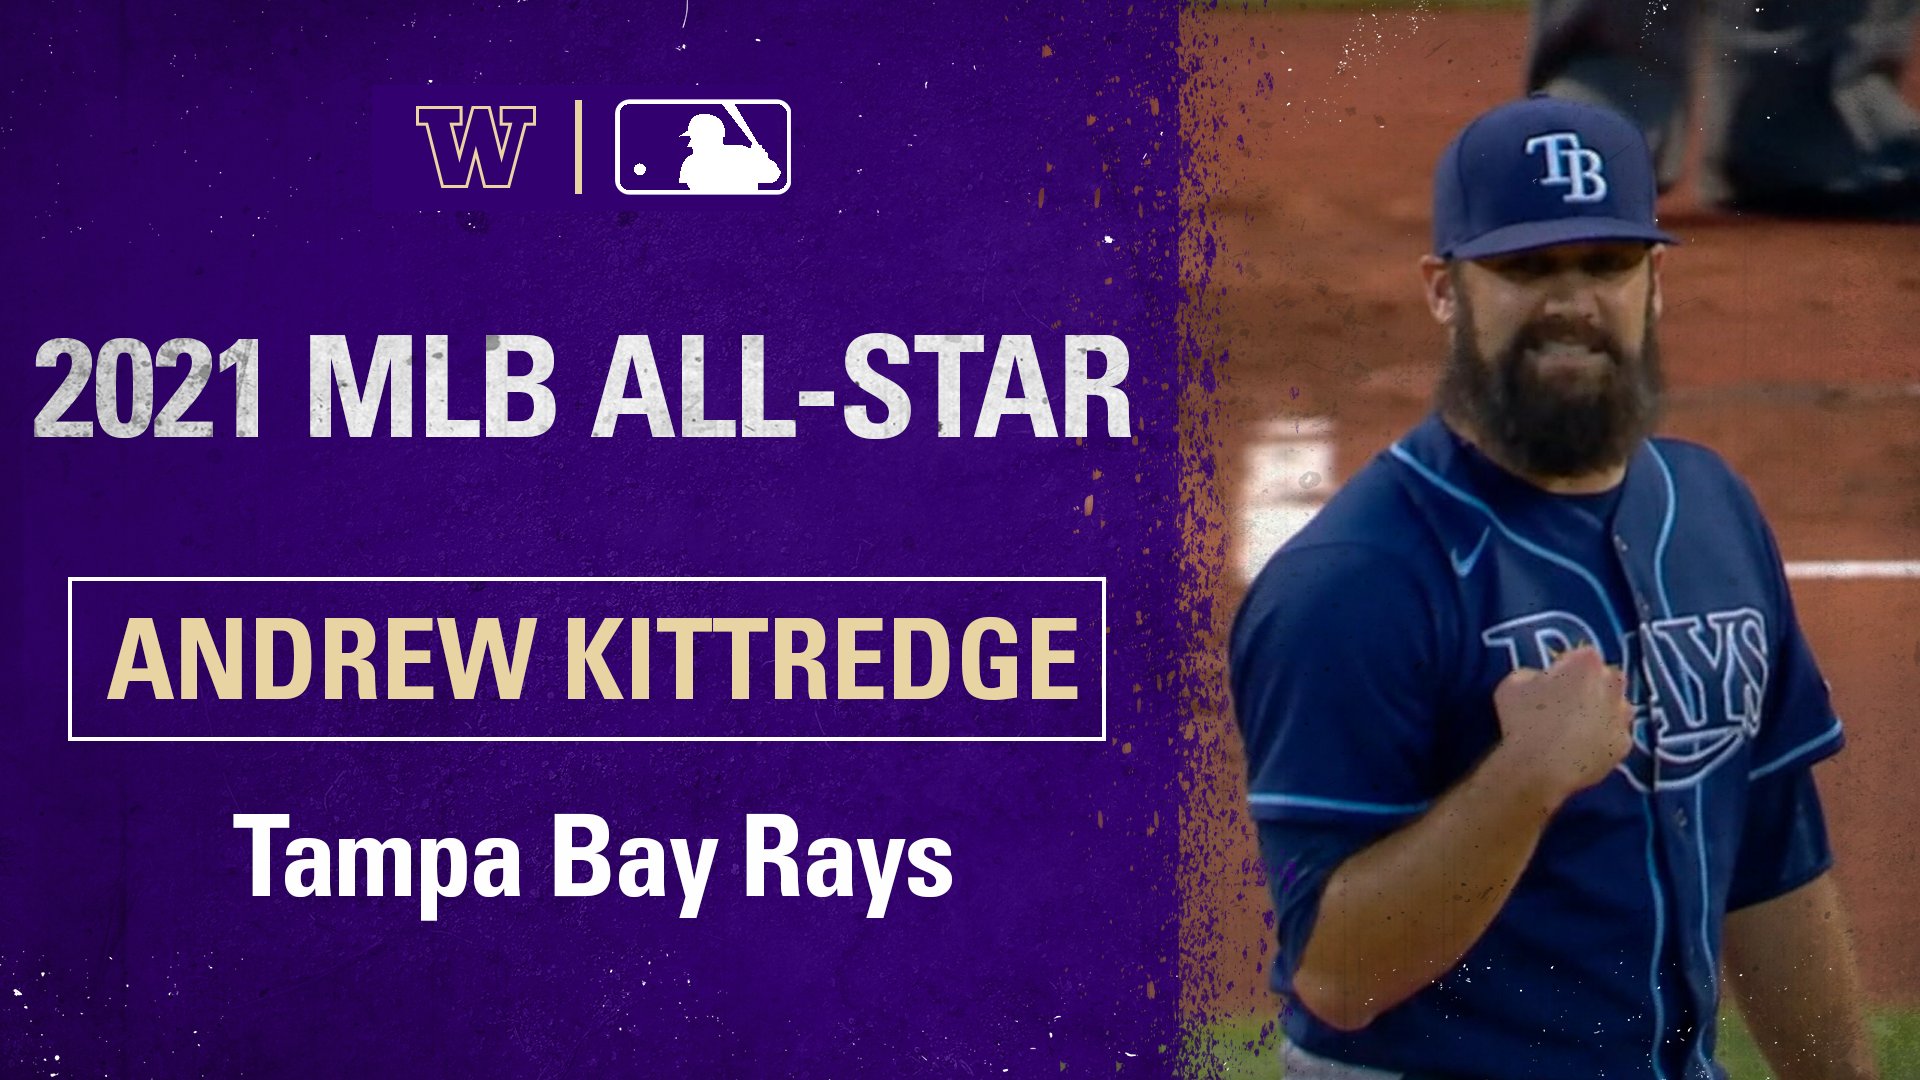 Washington Baseball on X: A huge congratulations to former Husky Andrew  Kittredge on being named a first-time MLB All-Star today! Andrew will  represent the AL and Tampa Bay Rays after a dominant